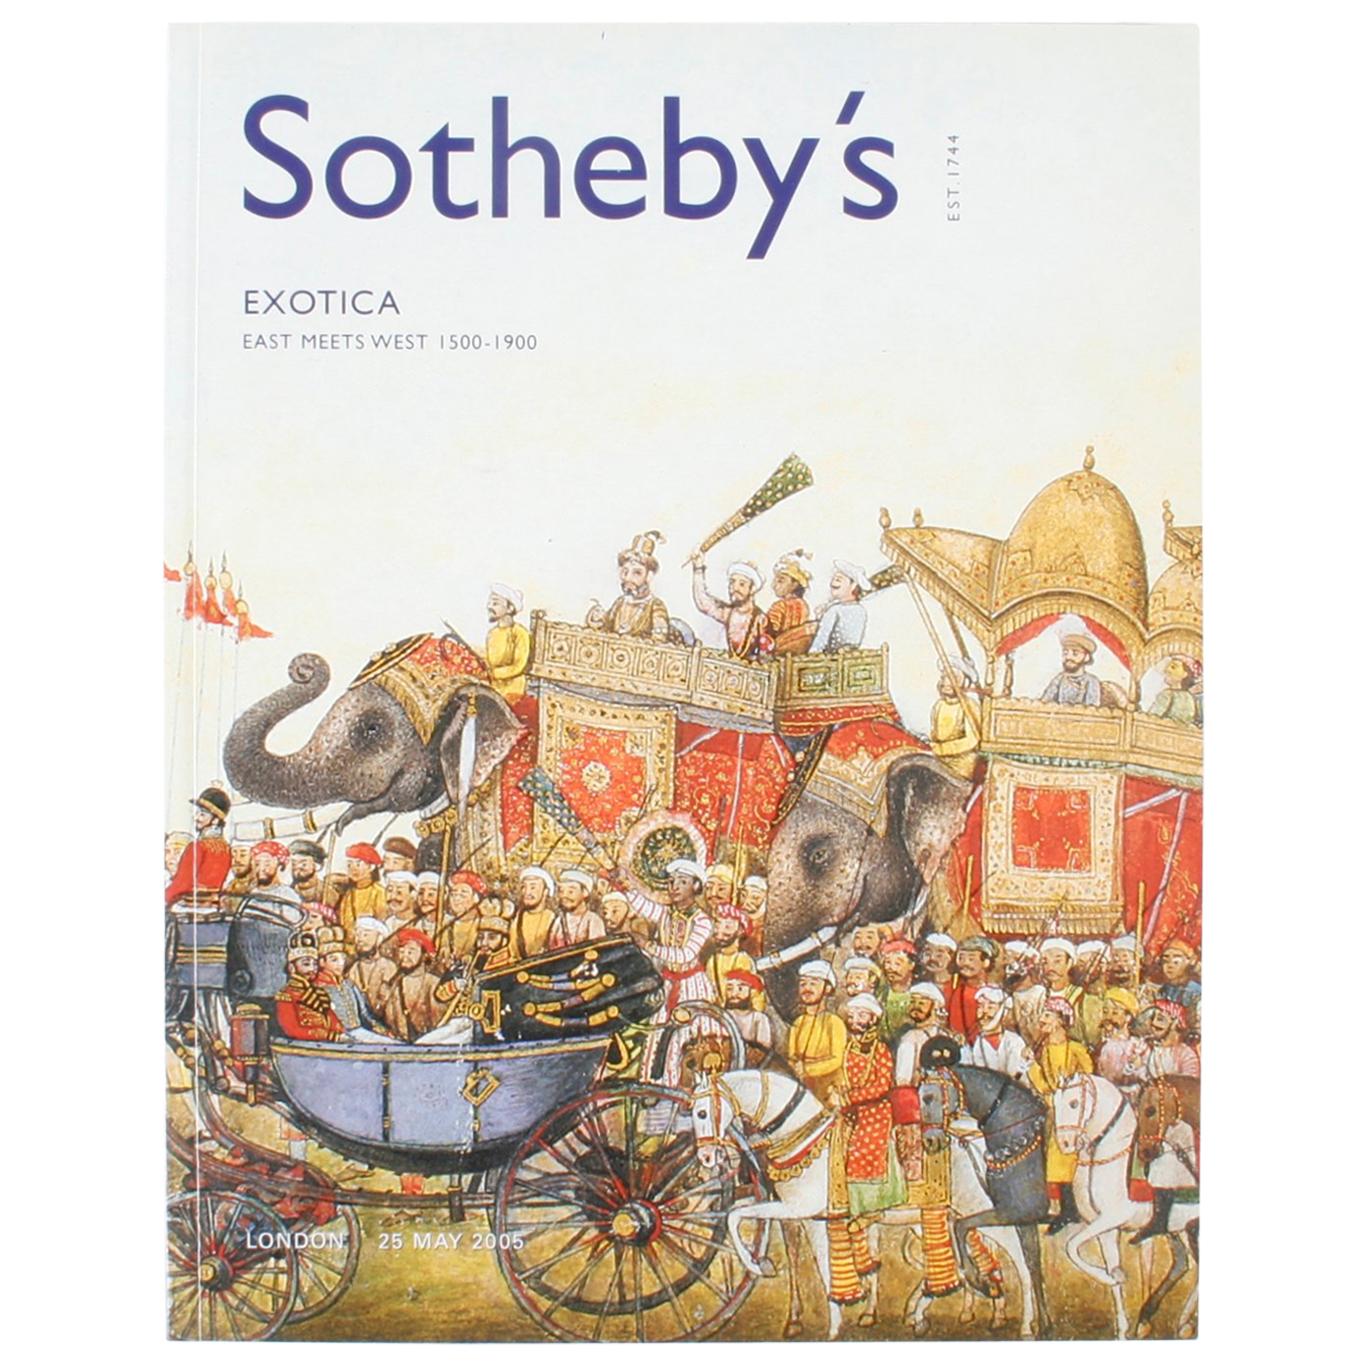 Sotheby's: Catalogue Exotica East Meets West 1500-1900, May 2005